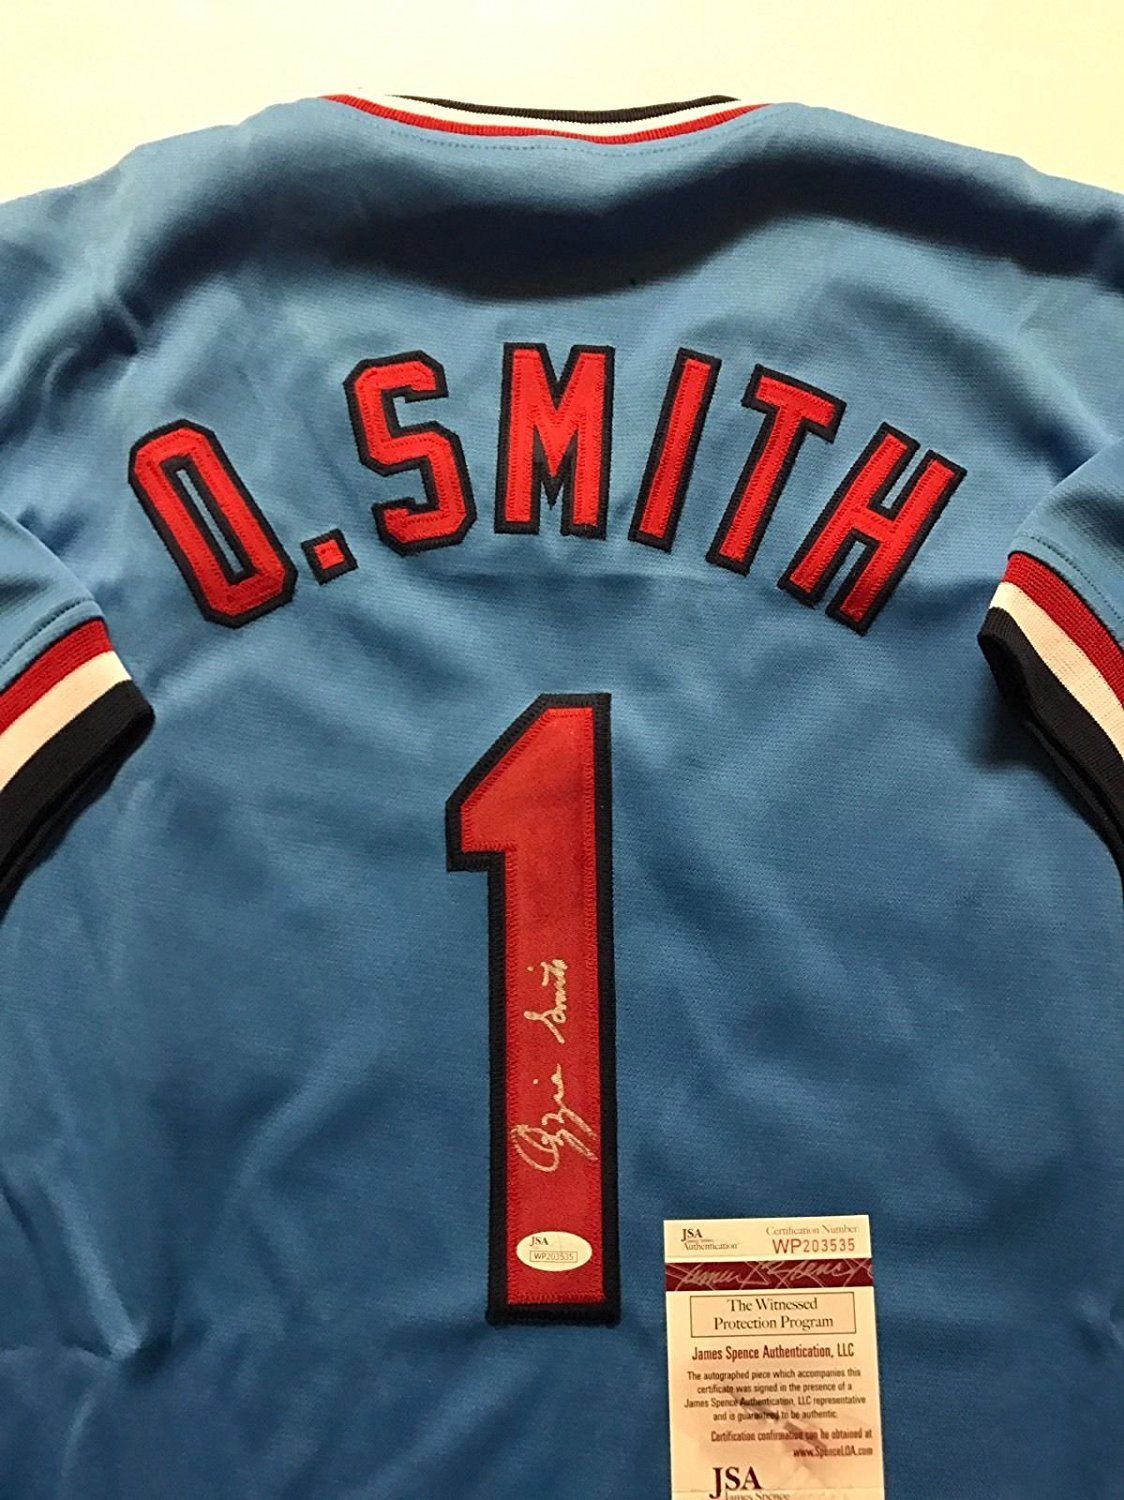 Ozzie Smith Signed Autographed St. Louis Cardinals Baseball Jersey